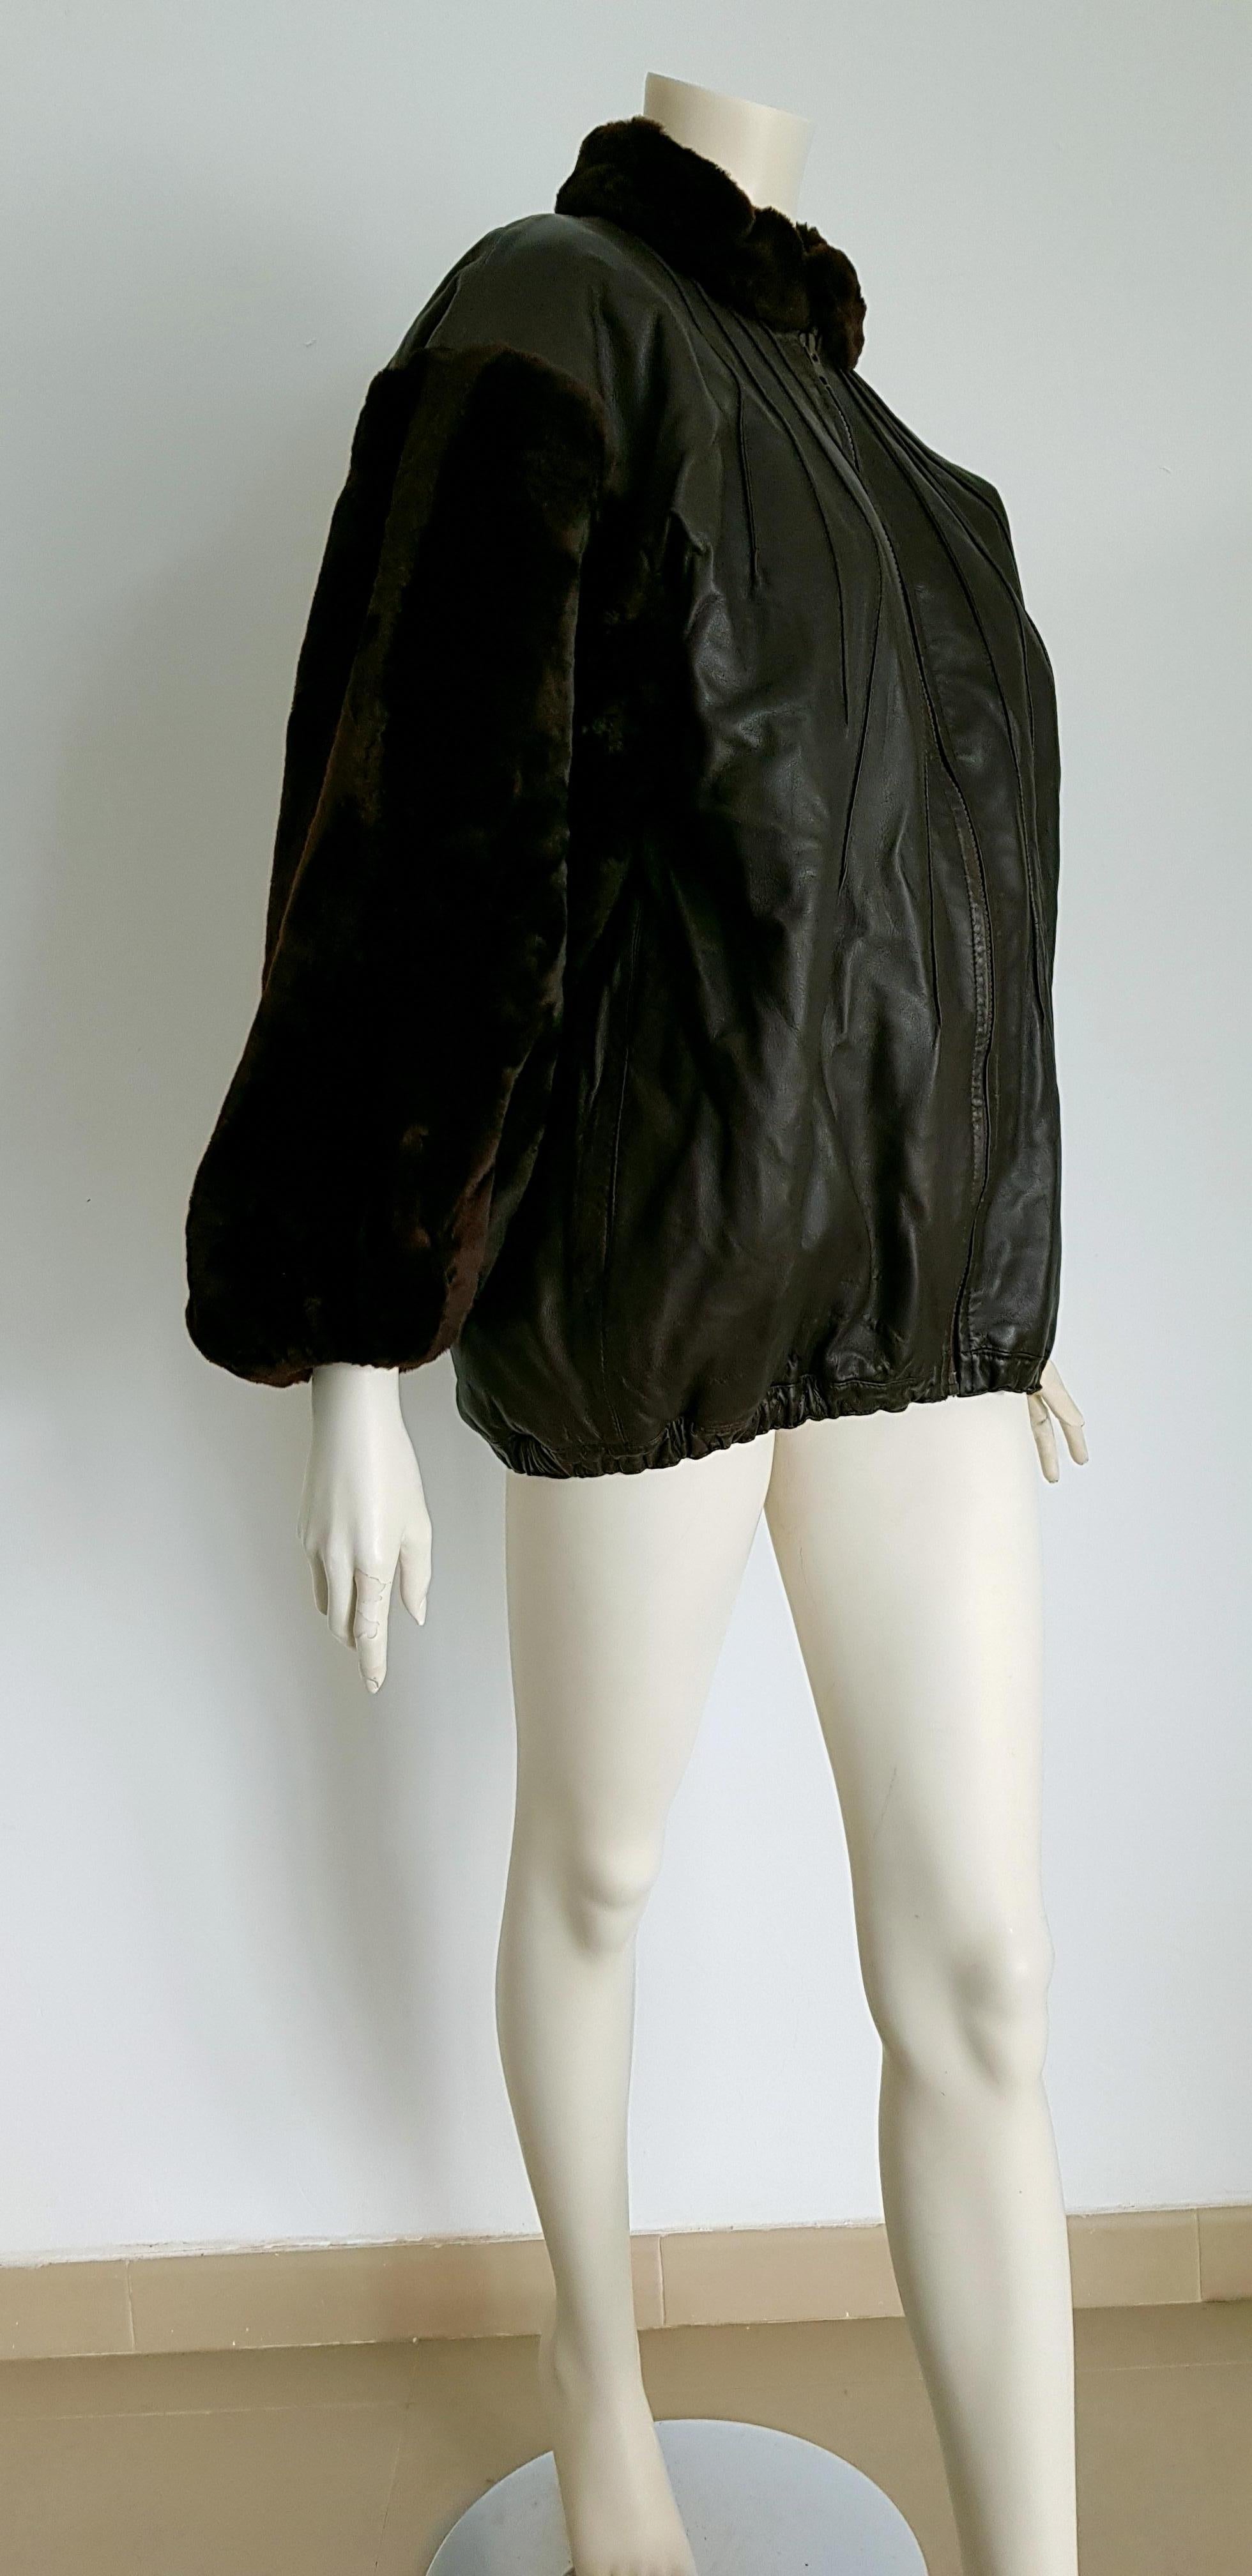 Yves SAINT LAURENT beaver Sleeves and Neck, Lambskin leather, Natural fur lined, Dark Brown acket  - Unworn, New.

SIZE: equivalent to about Small / Medium, please review approx measurements as follows in cm: lenght 74, chest underarm to underarm